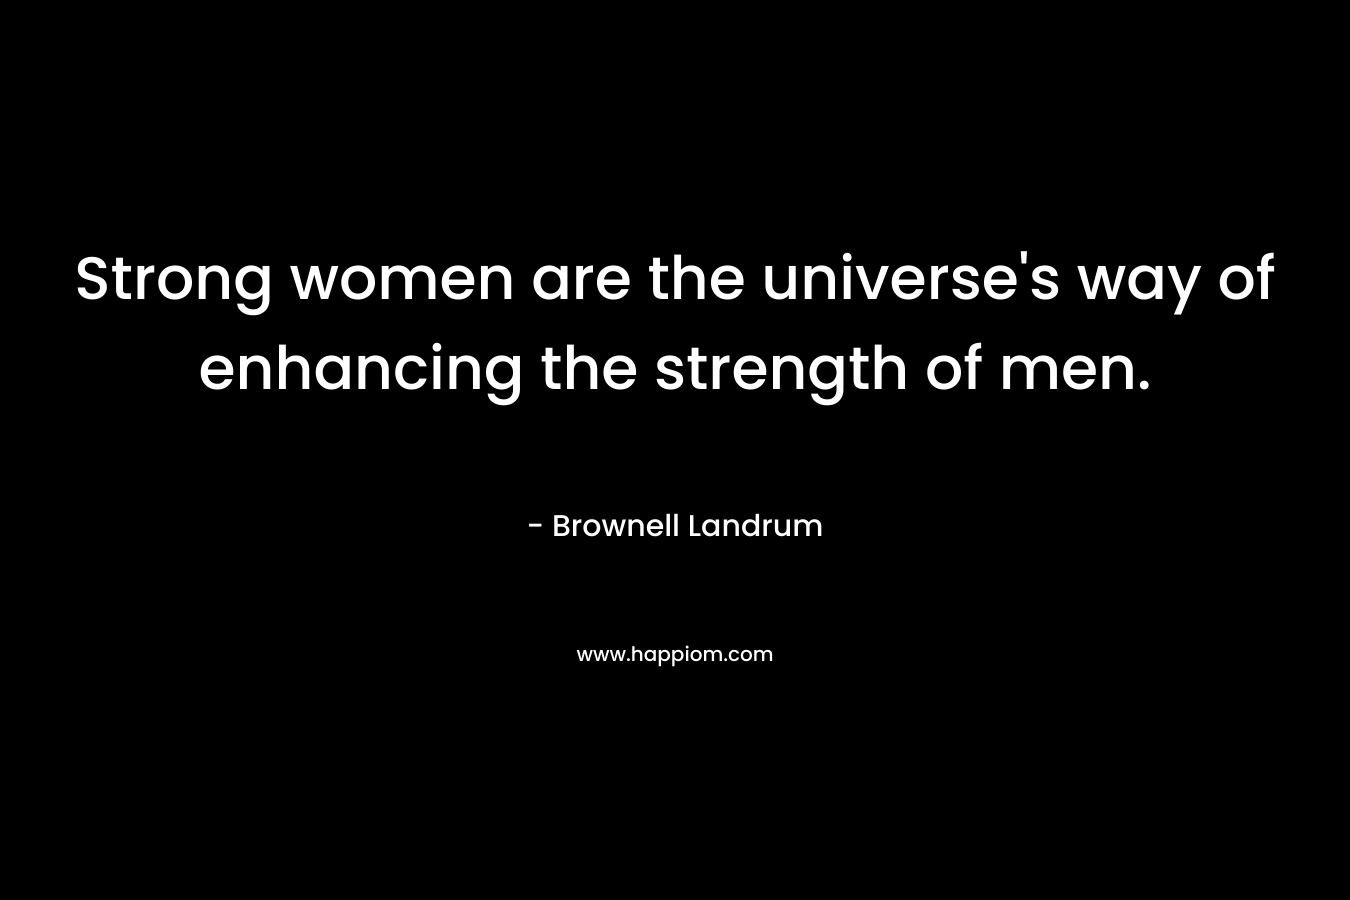 Strong women are the universe’s way of enhancing the strength of men. – Brownell Landrum